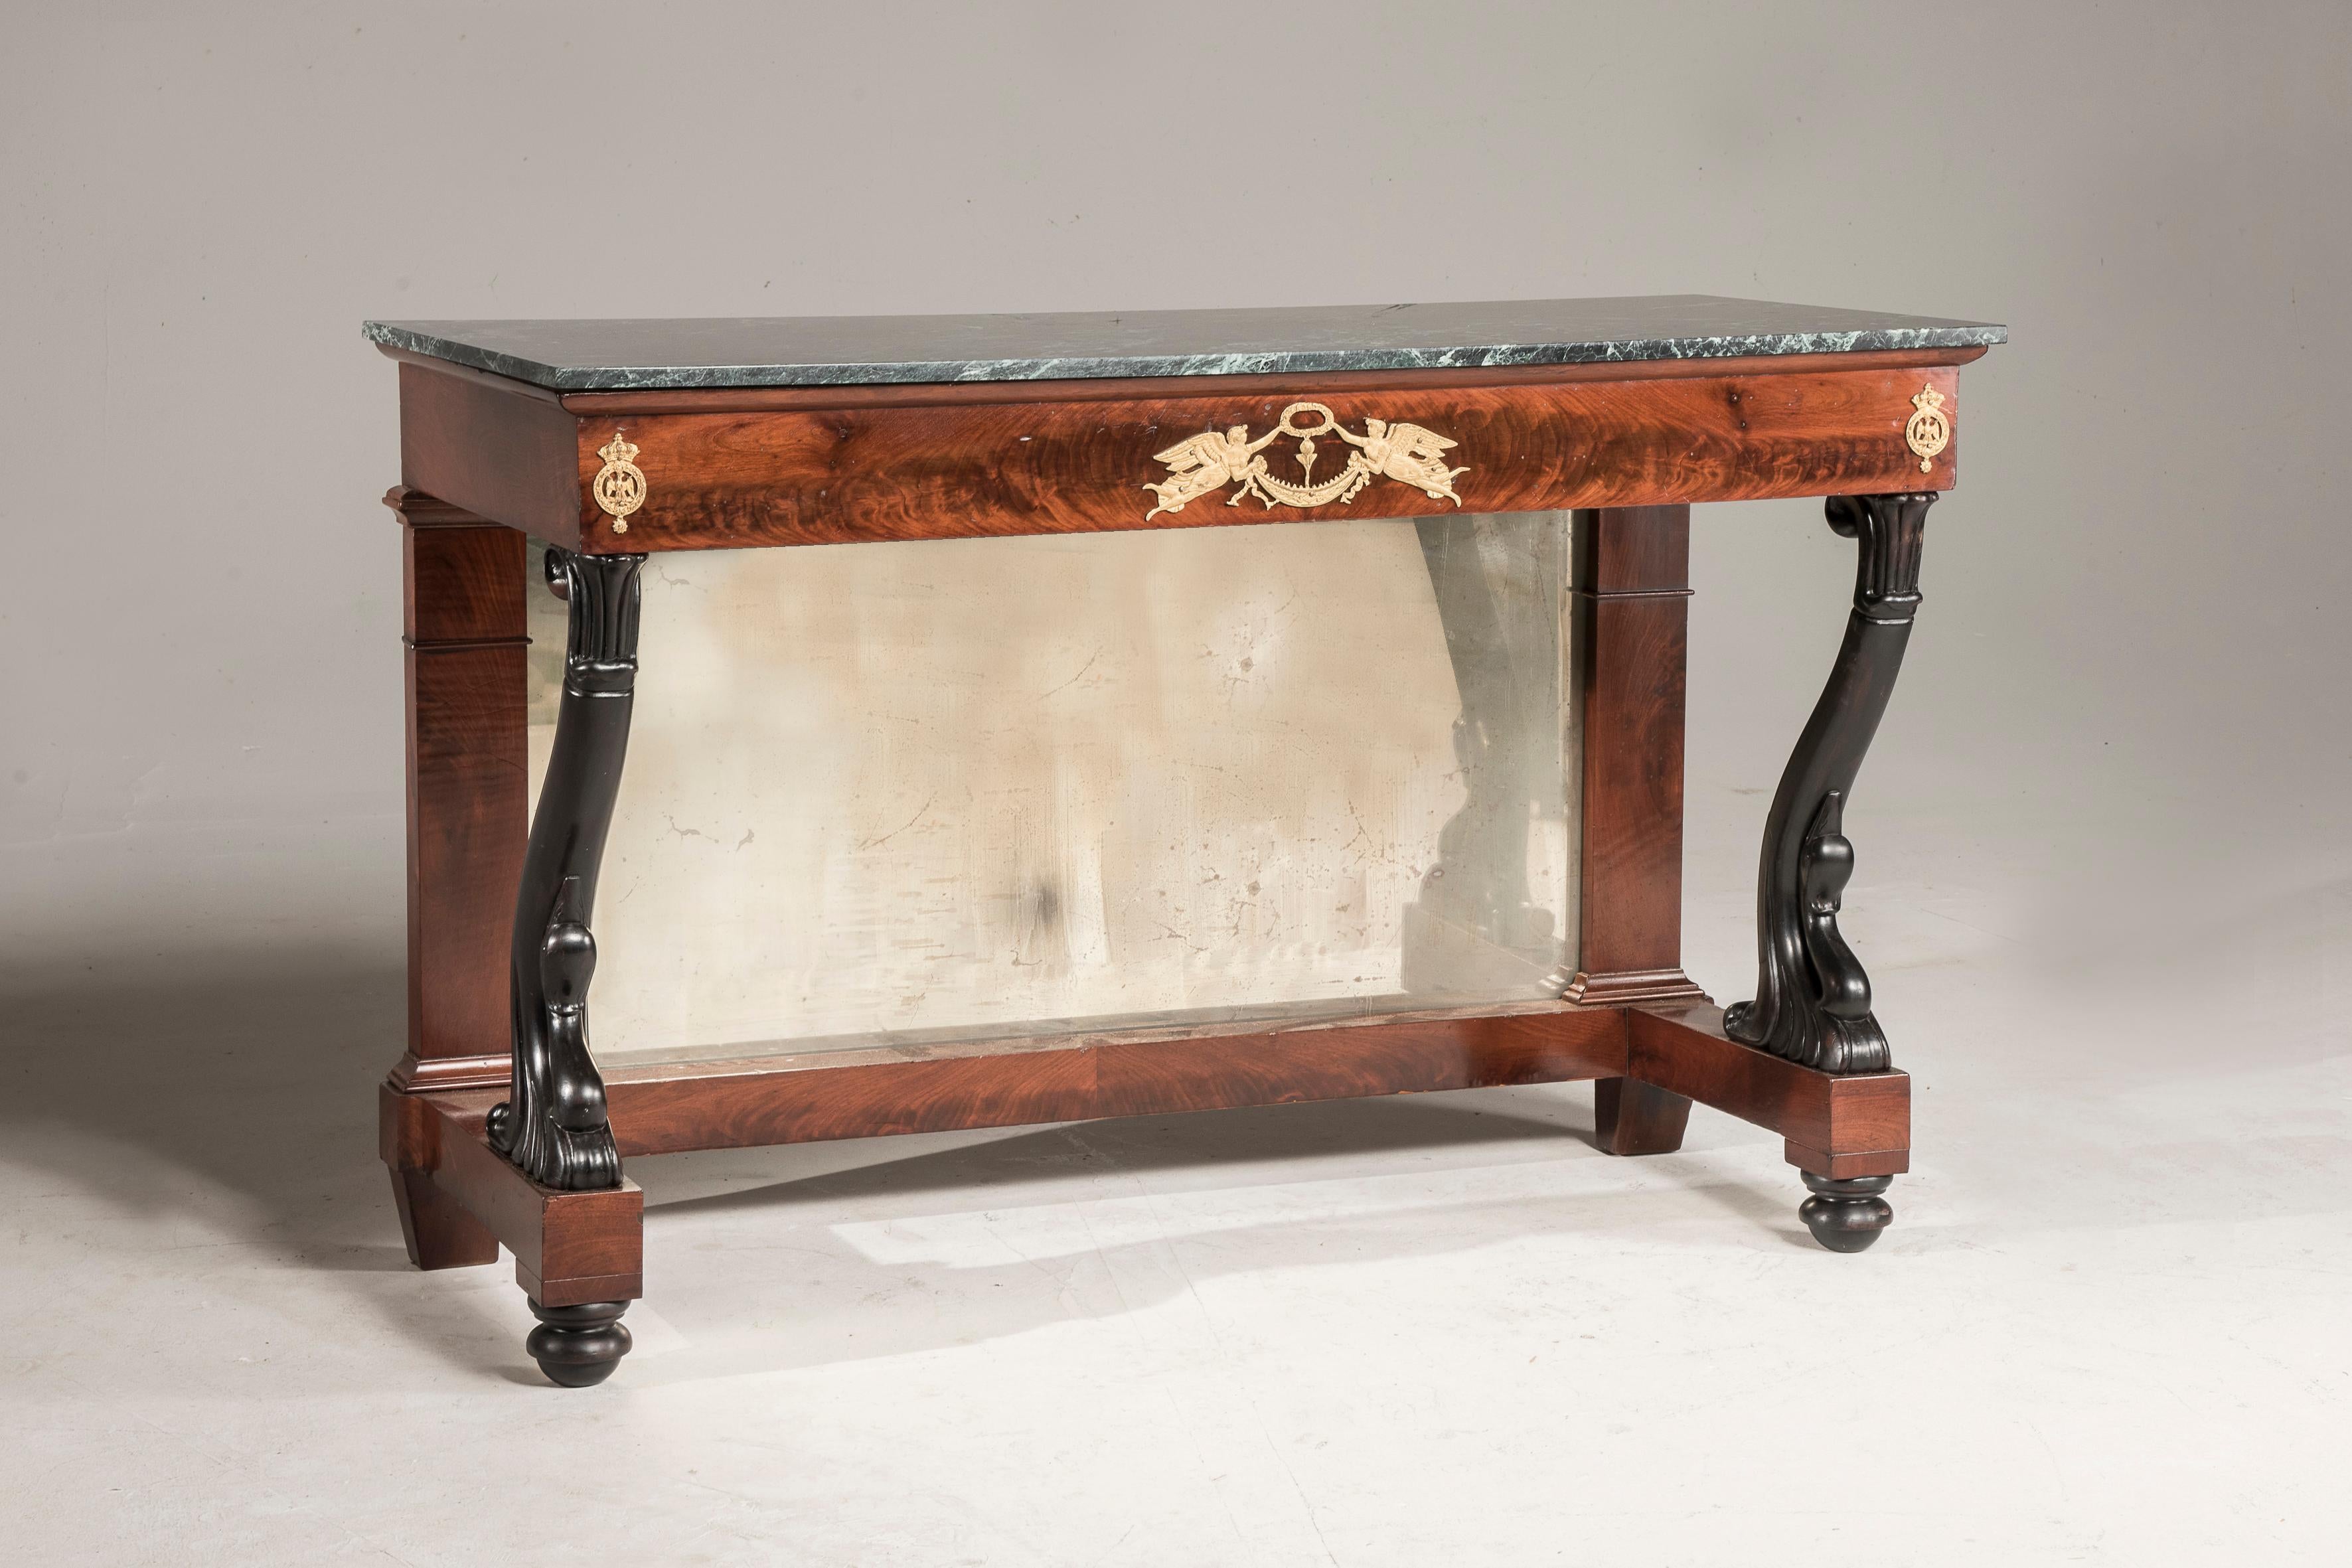 European Mahogany and Bronzes Empire Console Table with Marble Top Antique Mirror back For Sale